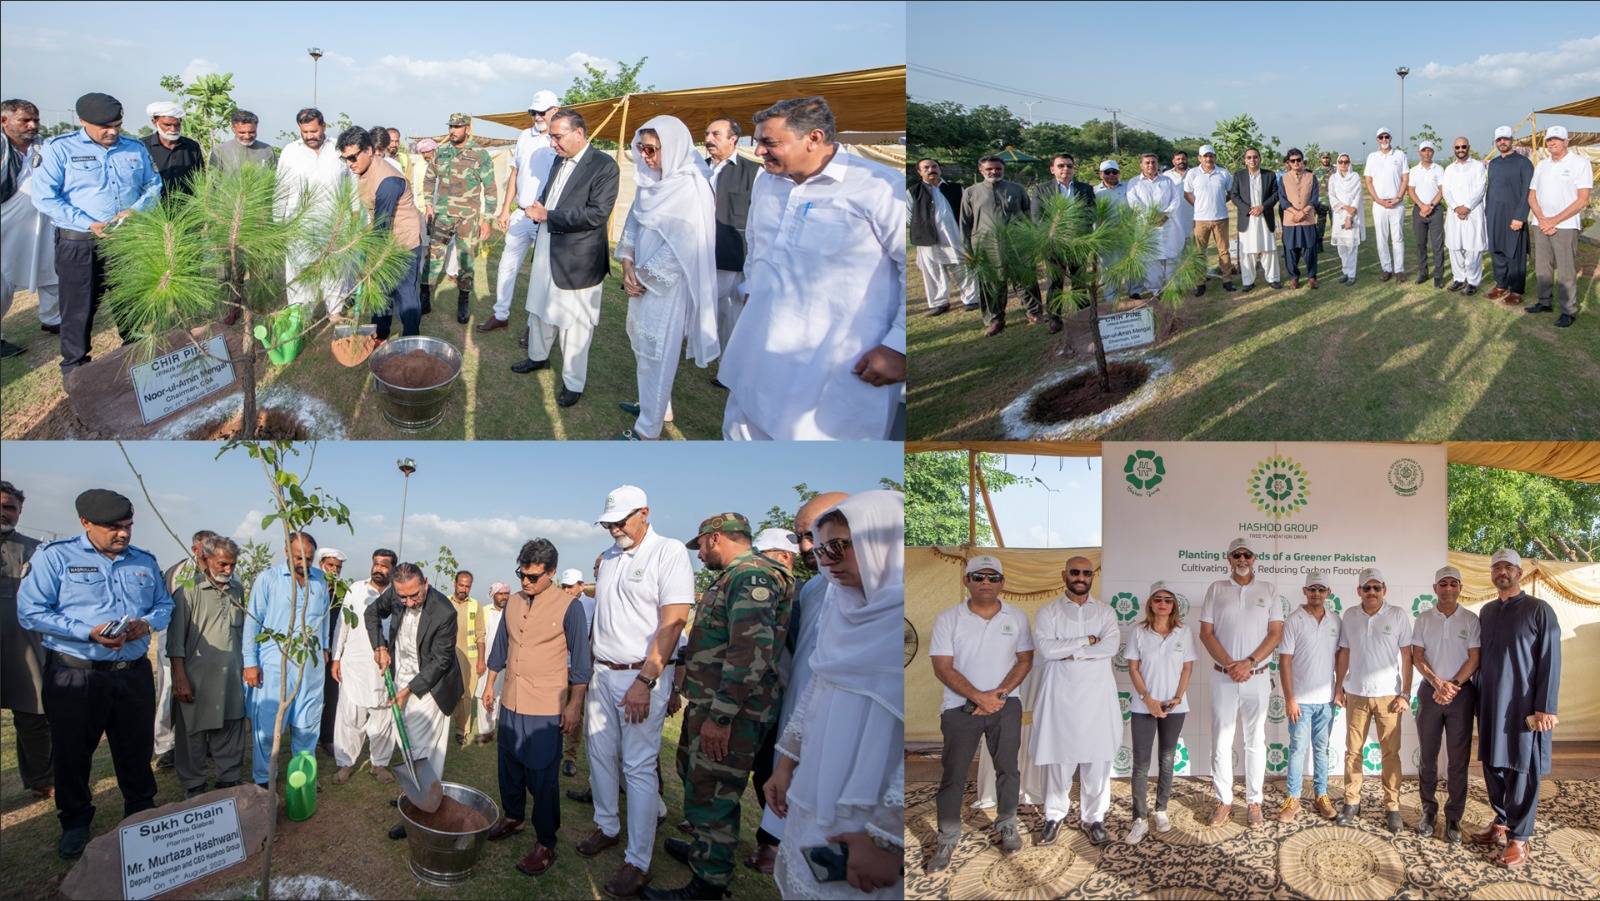 Hashoo Group and Capital Development Authority join hands for a Greener Pakistan